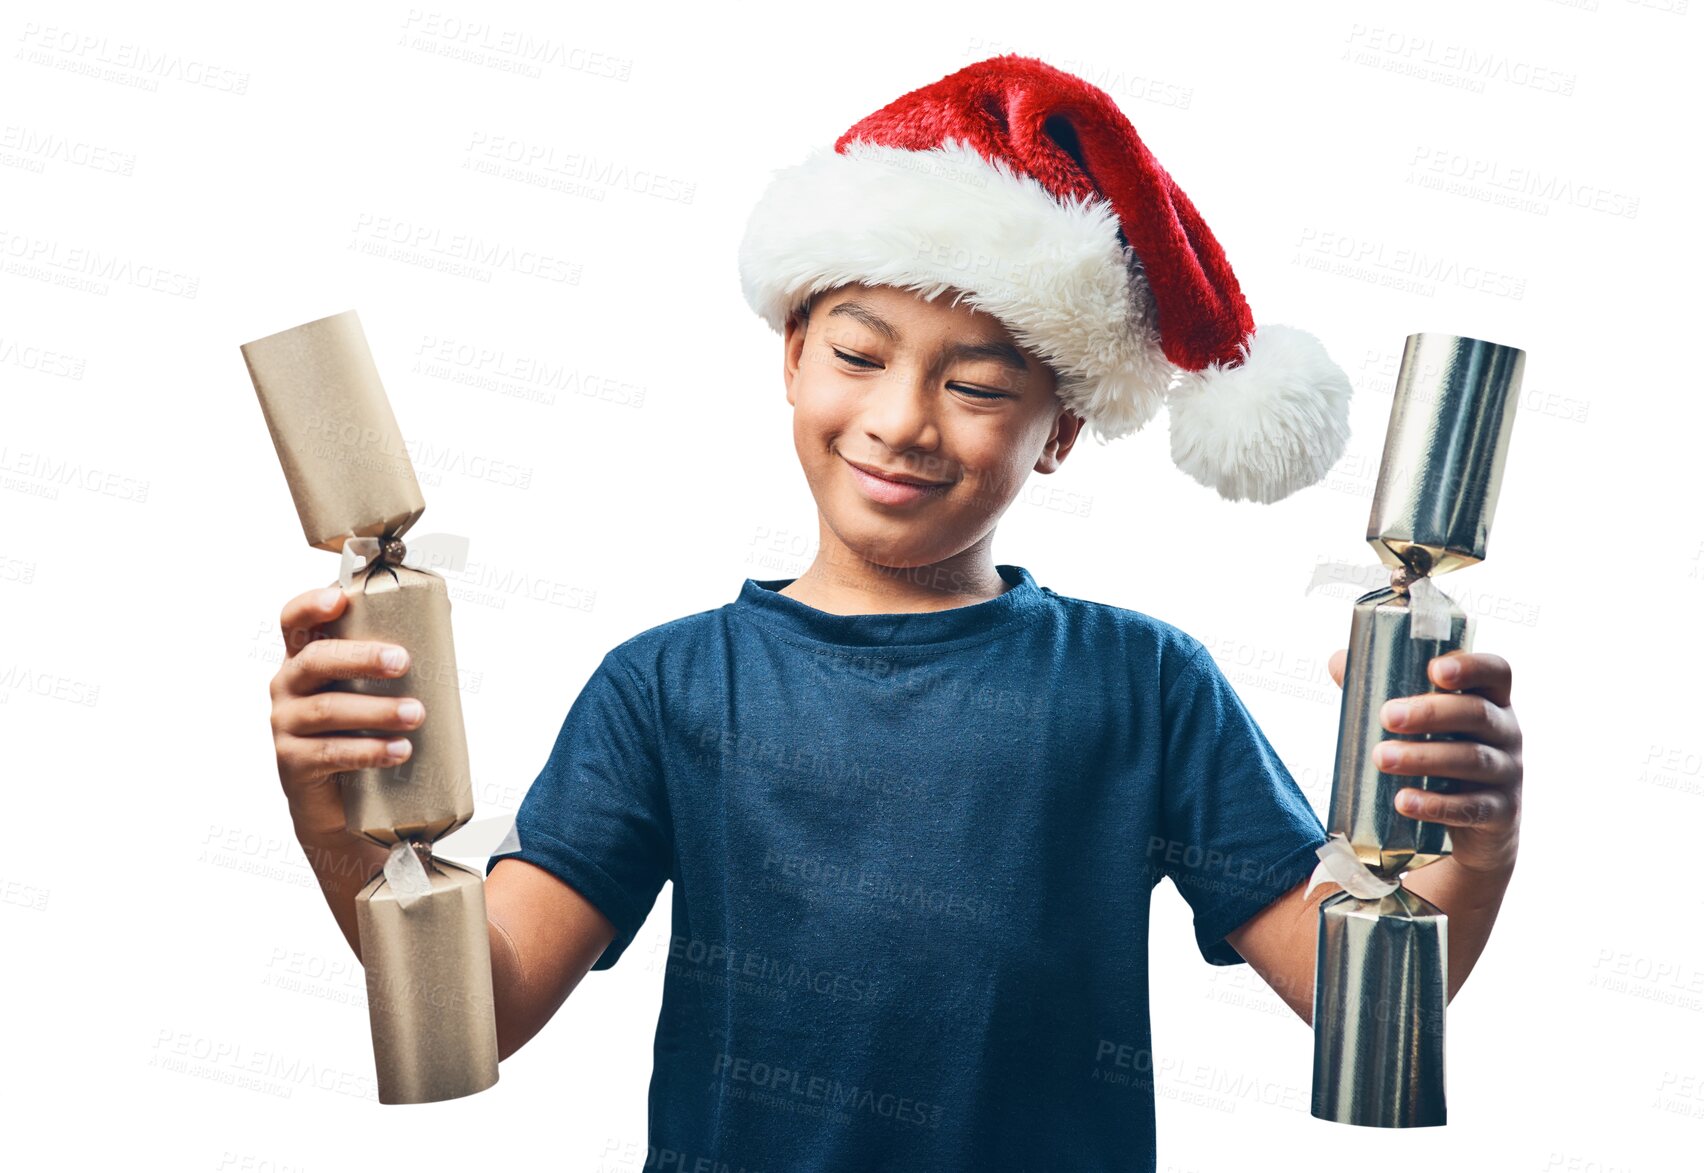 Buy stock photo Christmas, playing or child with crackers in celebration of a holiday with happiness or joy in party. Curious, playful or young boy thinking of toy gifts isolated on transparent png background  